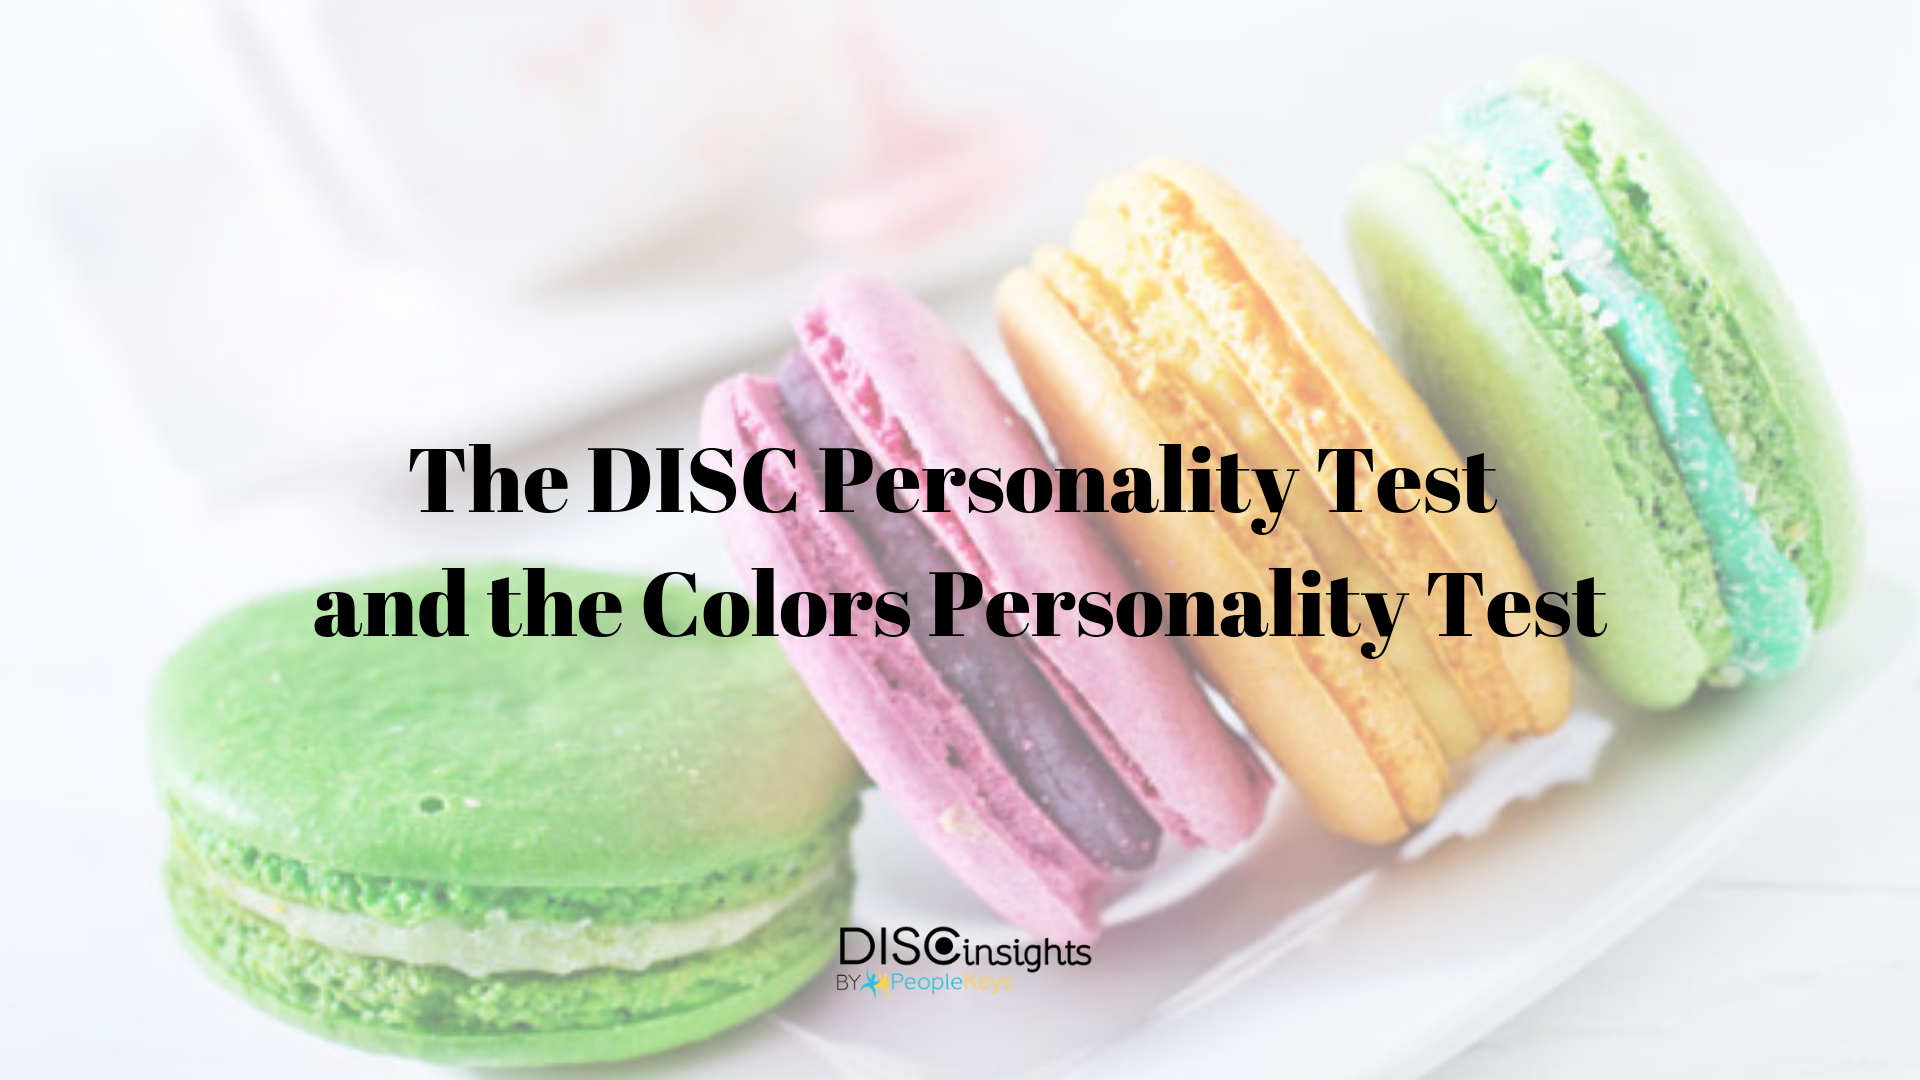 The DISC Personality Test and the Colors Personality Test